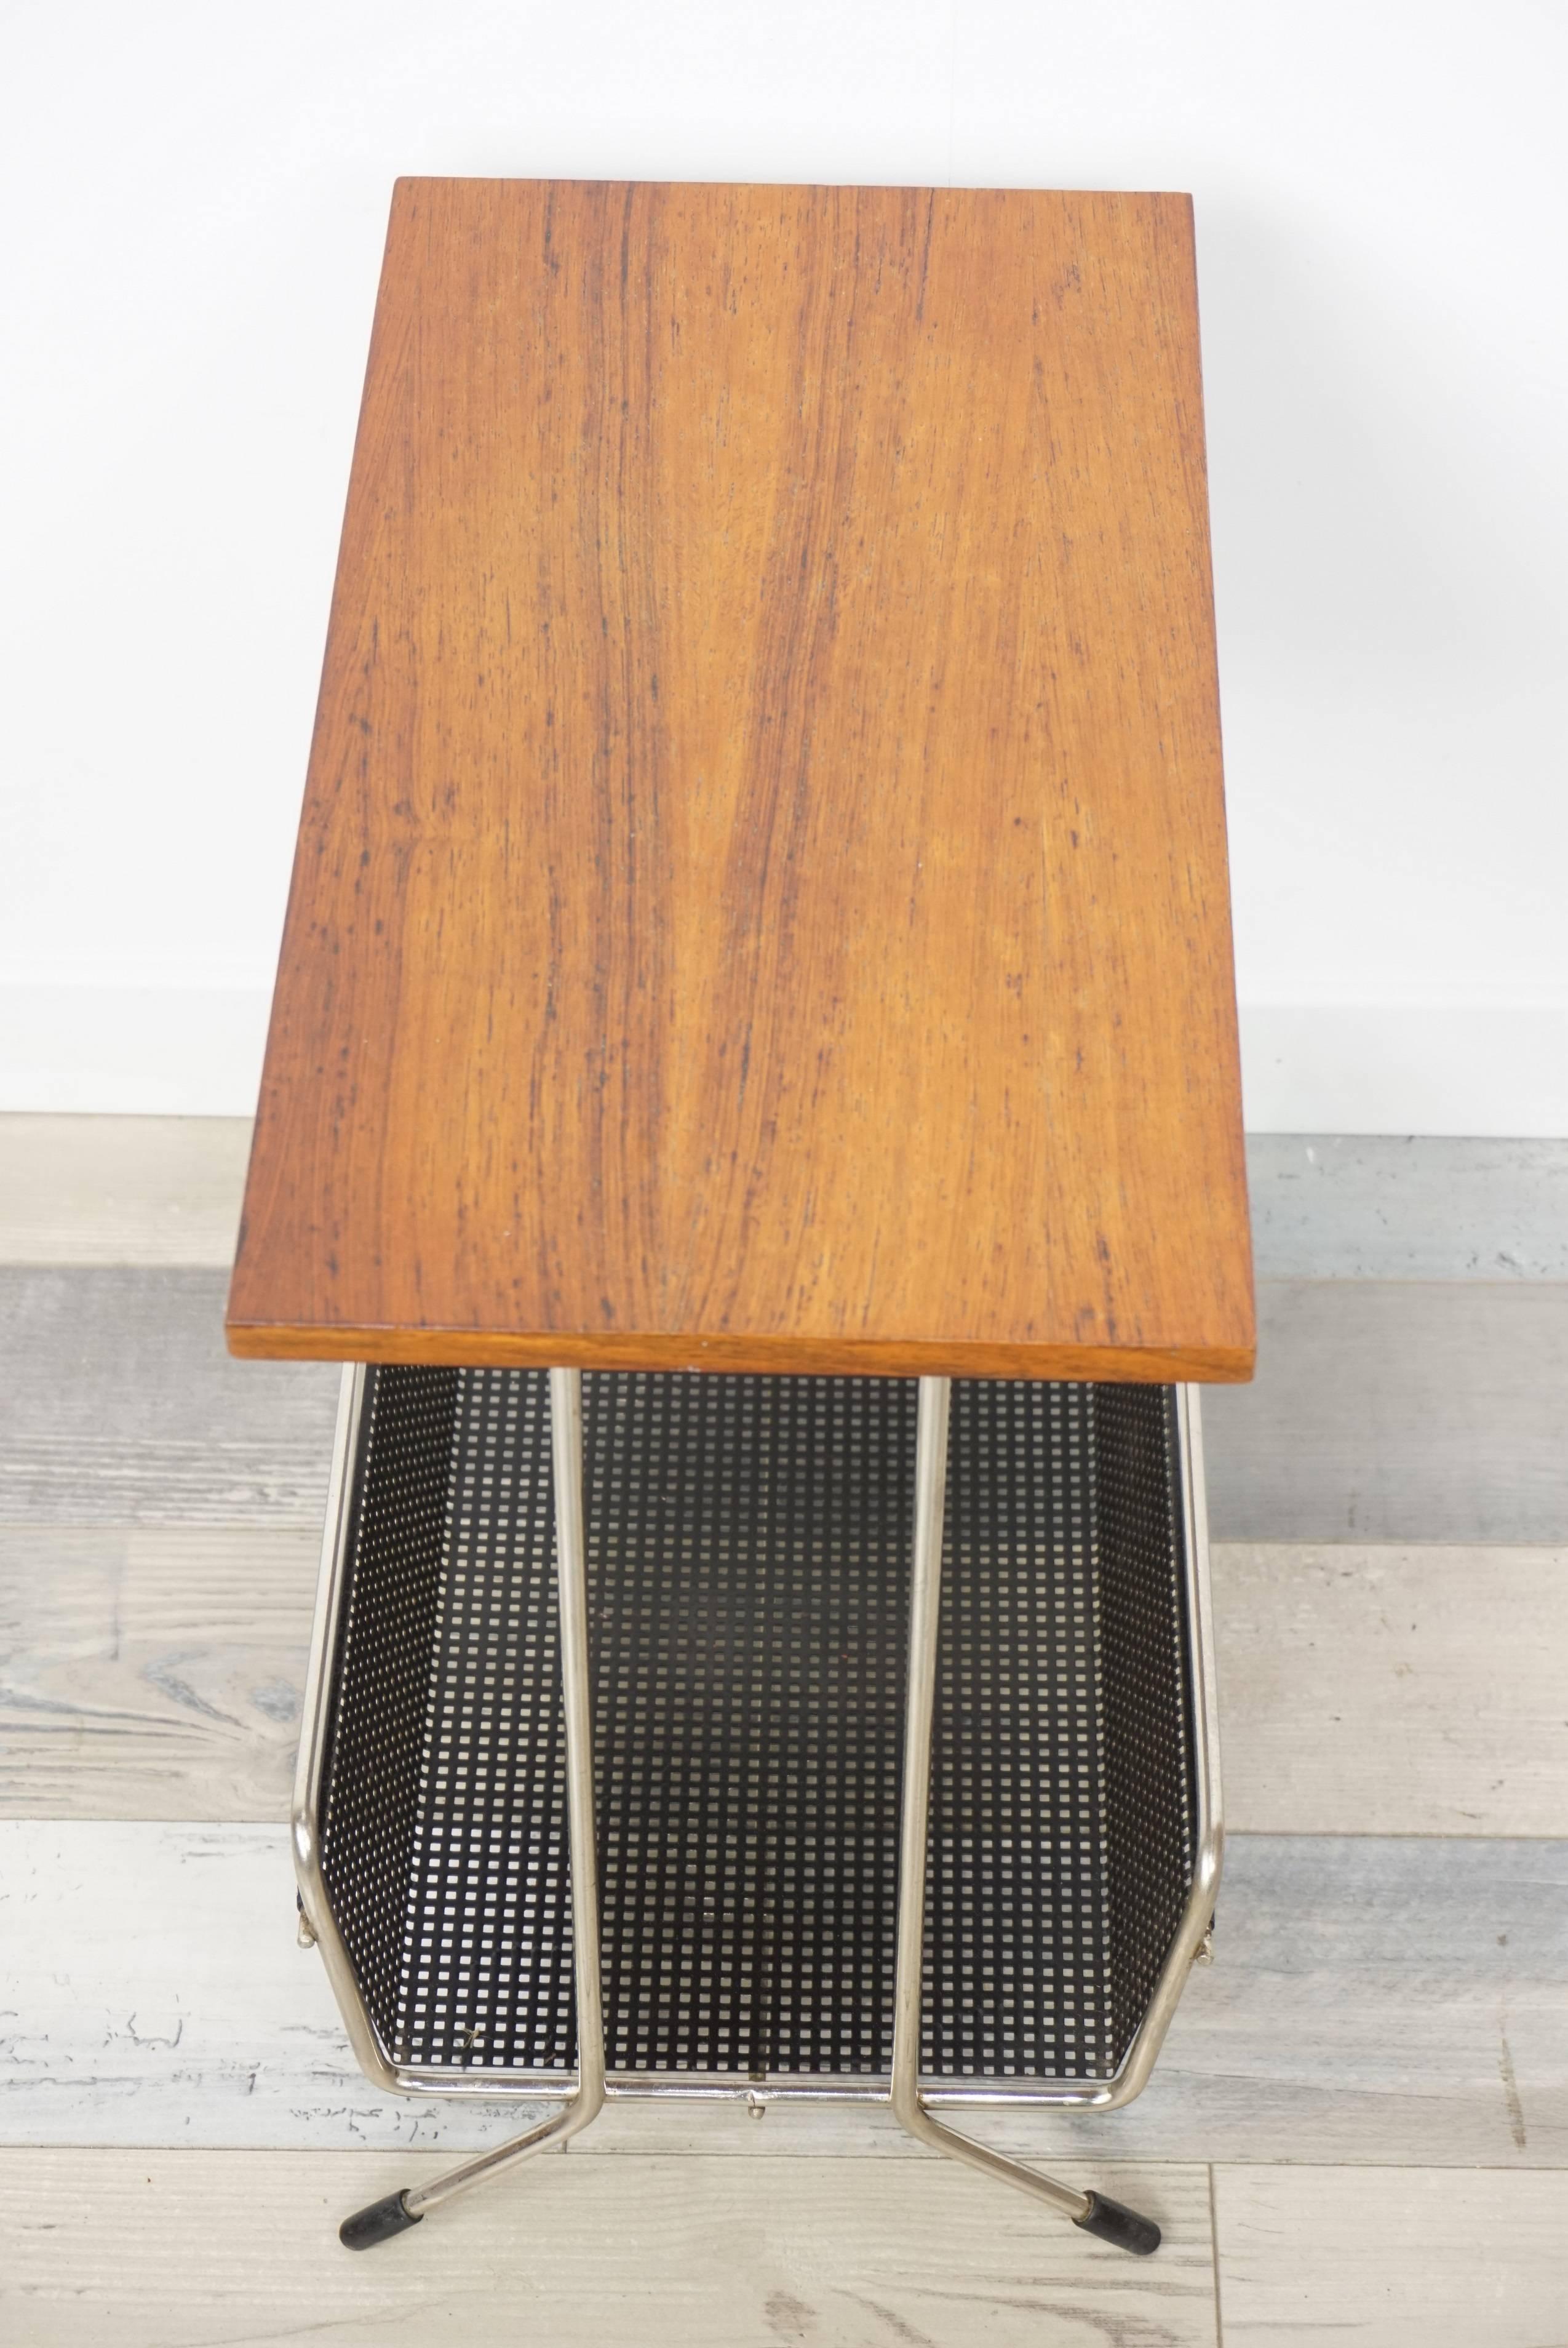 Dutch design of the 1950s, work for Pilastro by Tjerk Reijenga (designer and Dutch avant-garde architect since he only wants renewable materials for these creations! World famous, he is now specialized in sustainable development) for this table